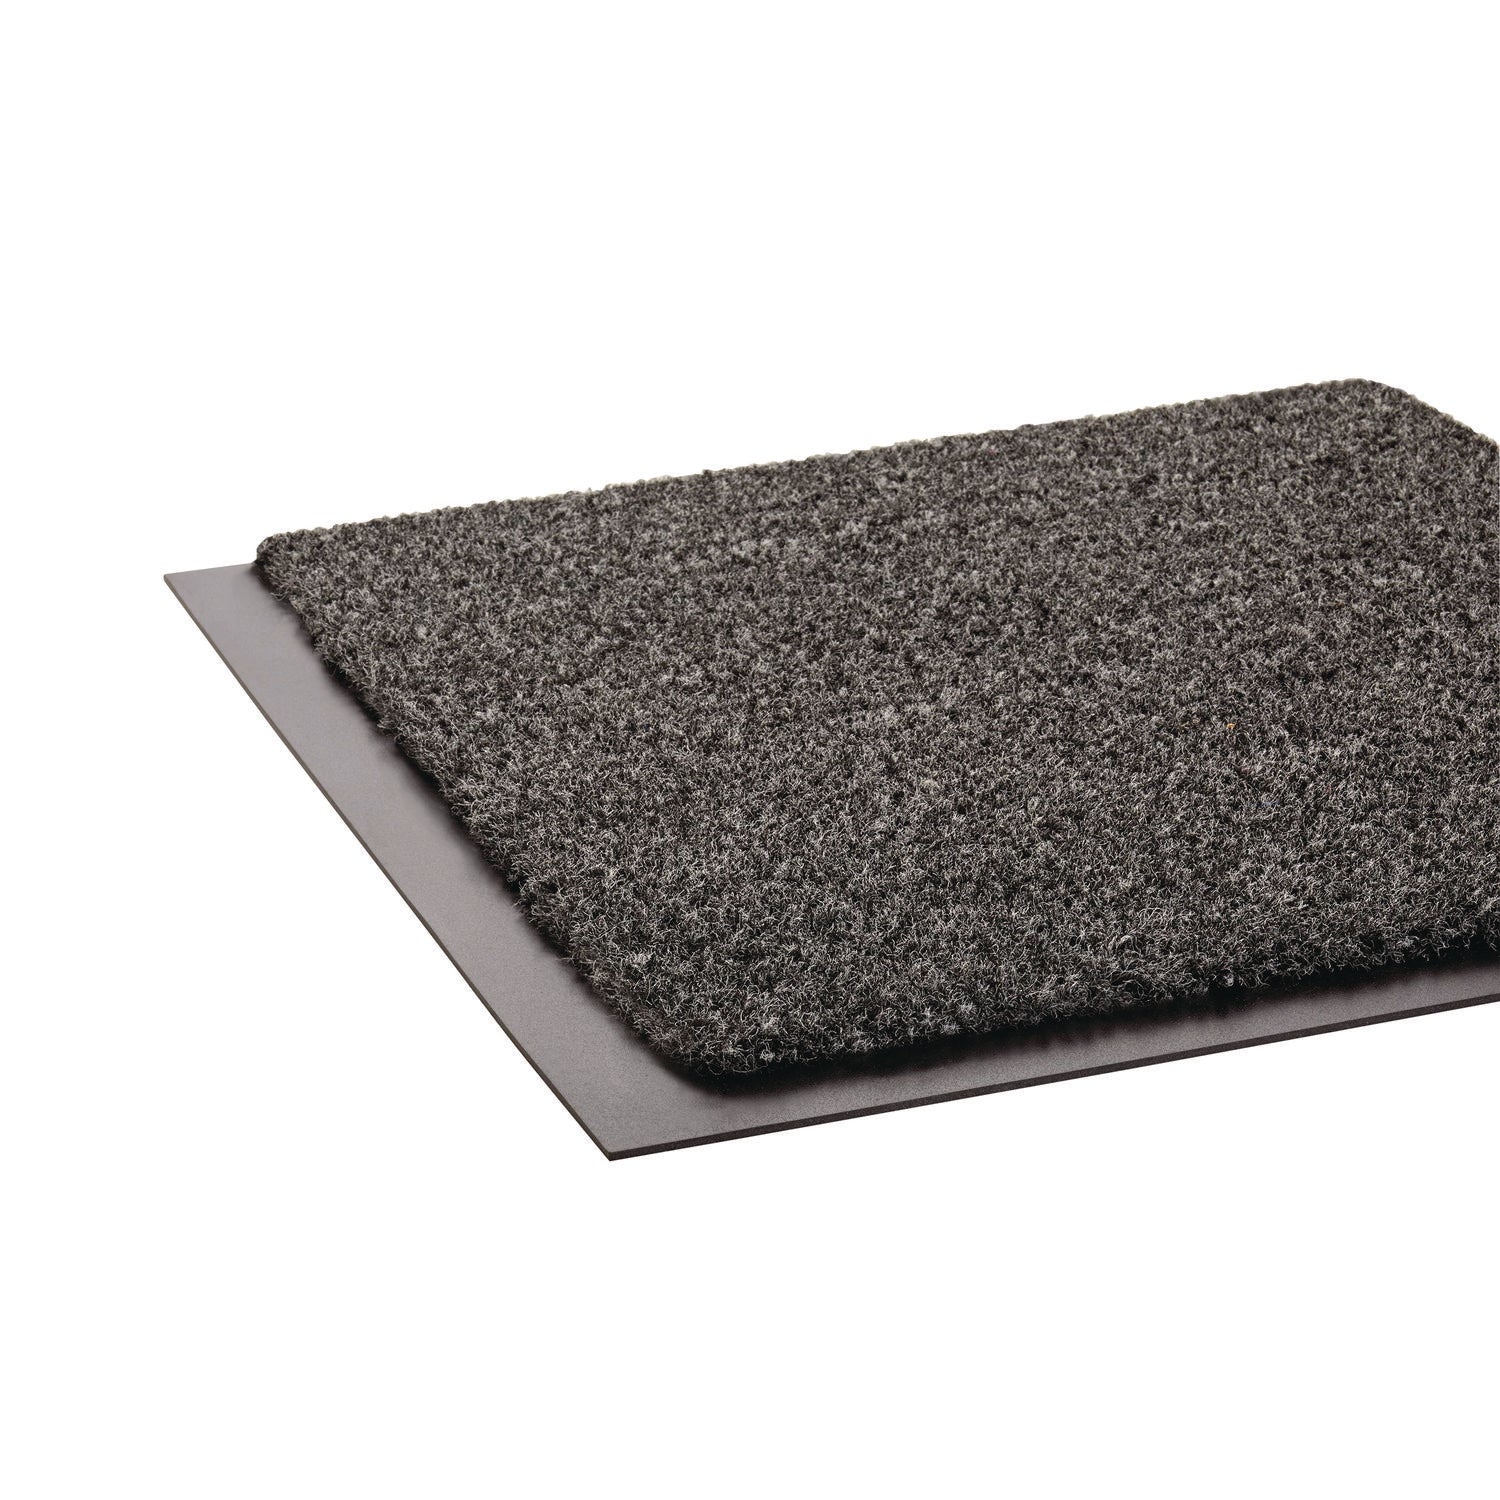 Rely-On Olefin Indoor Wiper Mat, 48 x 72, Charcoal - 3